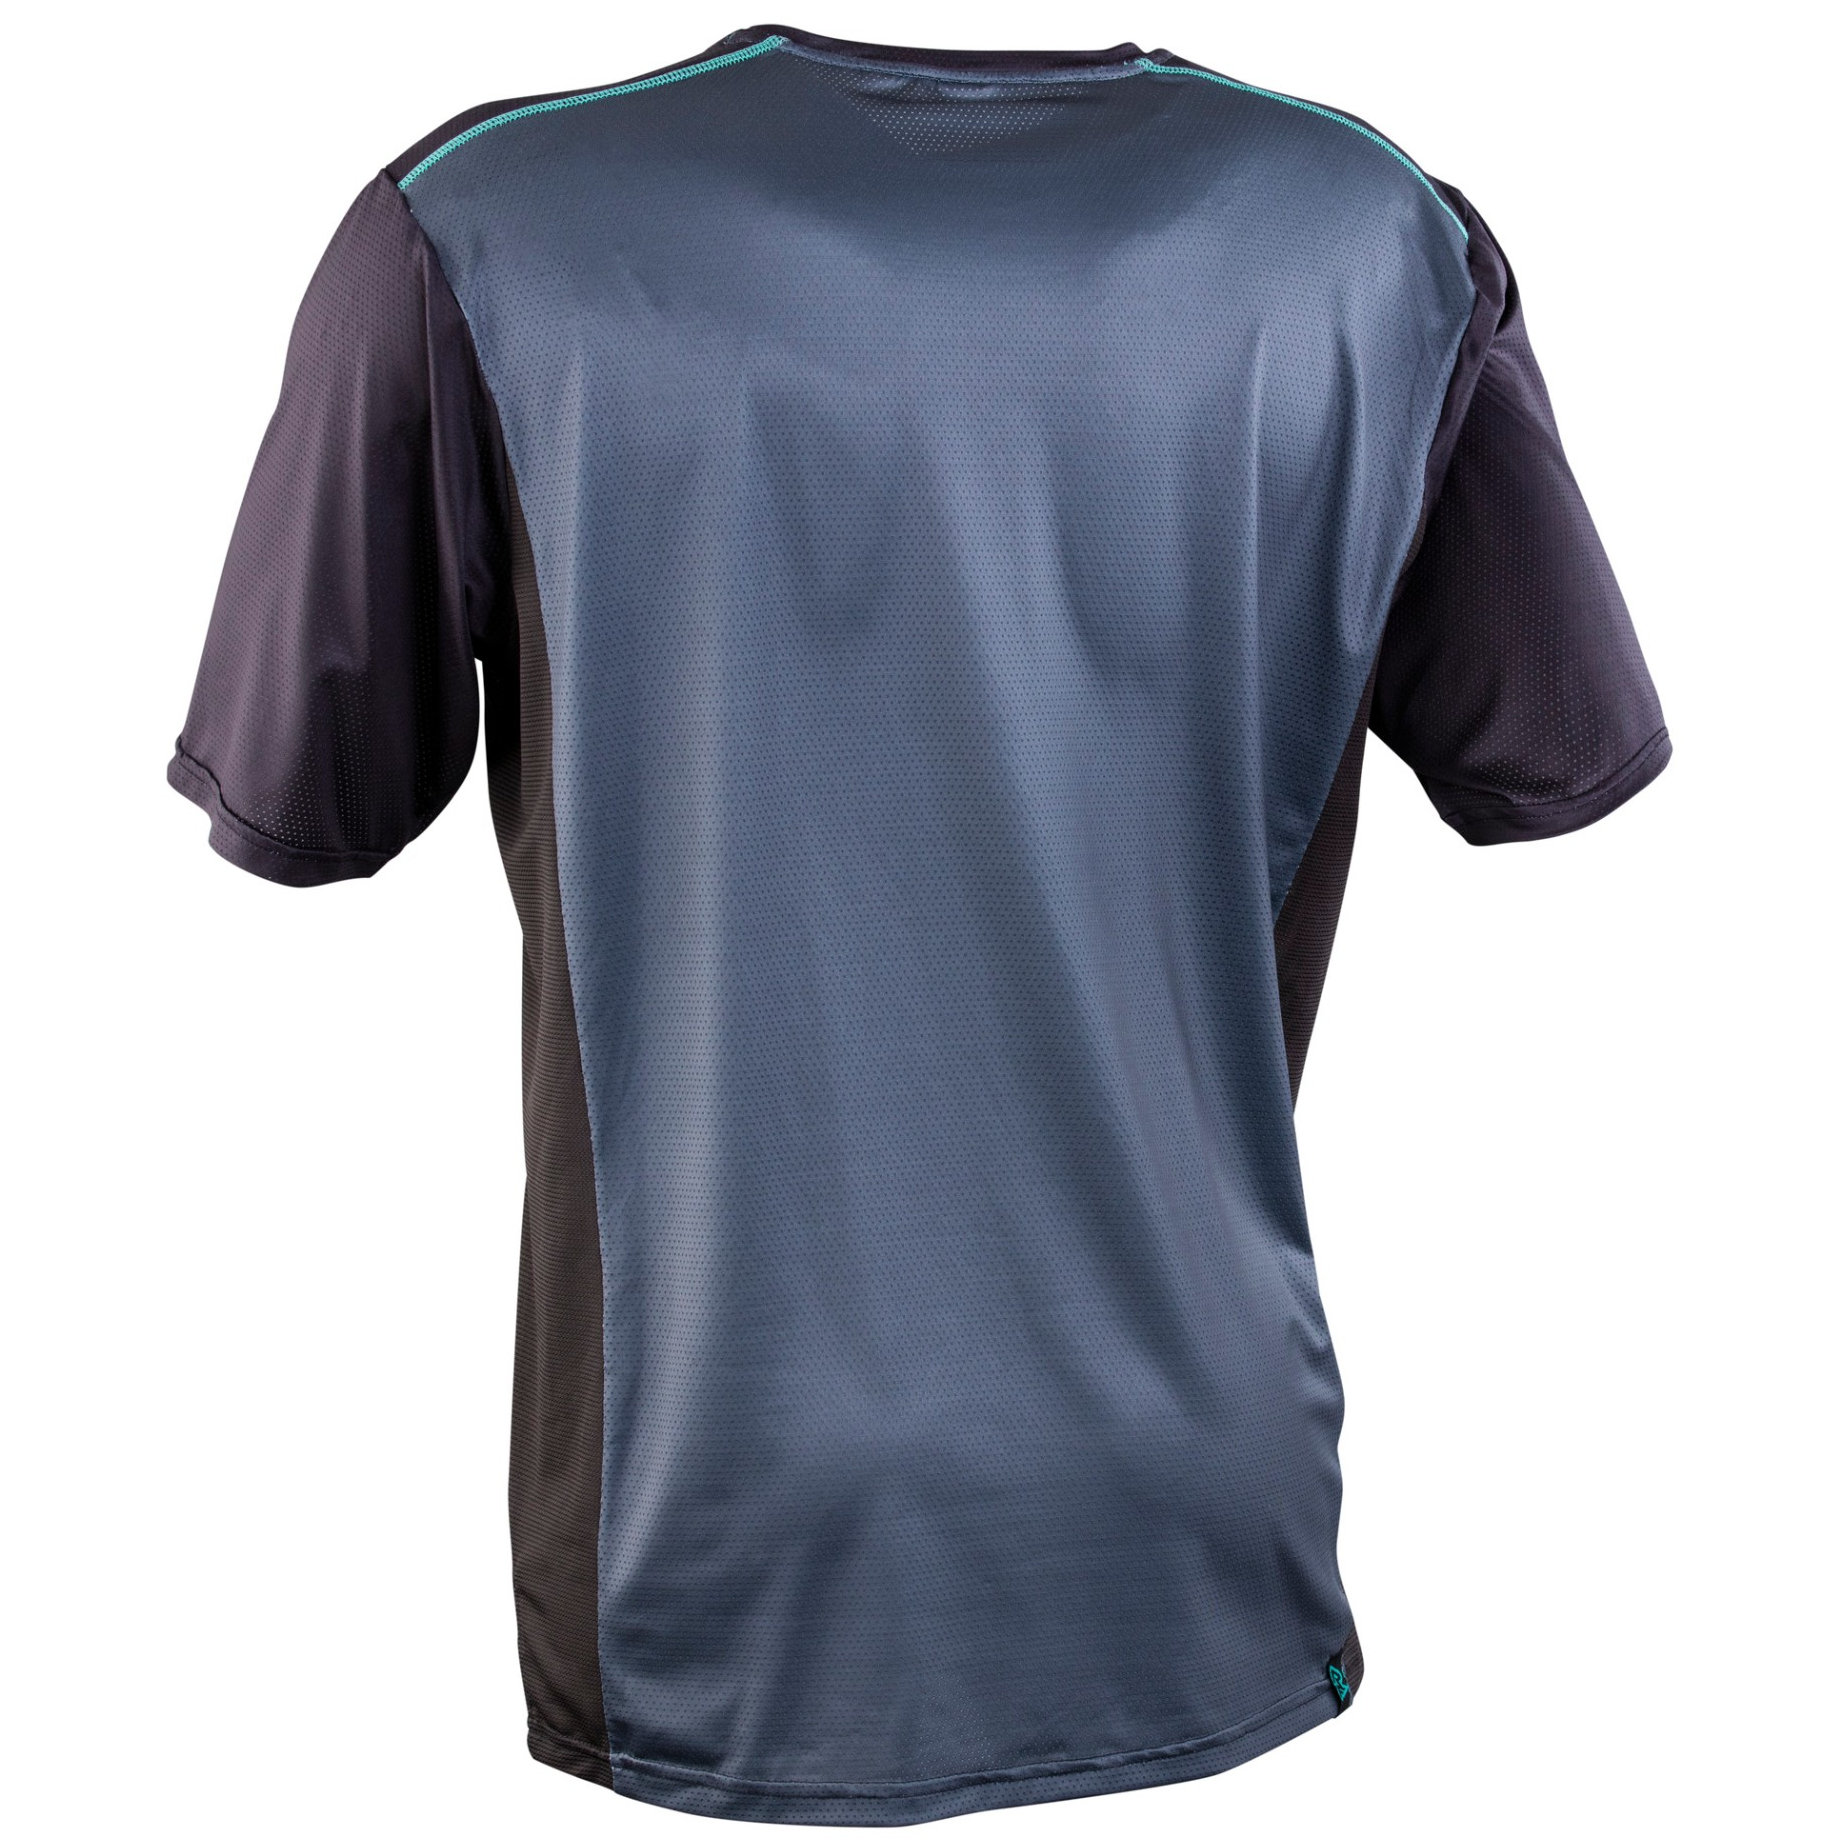 Race Face Indy Short Sleeve Cycling Jersey | Merlin Cycles